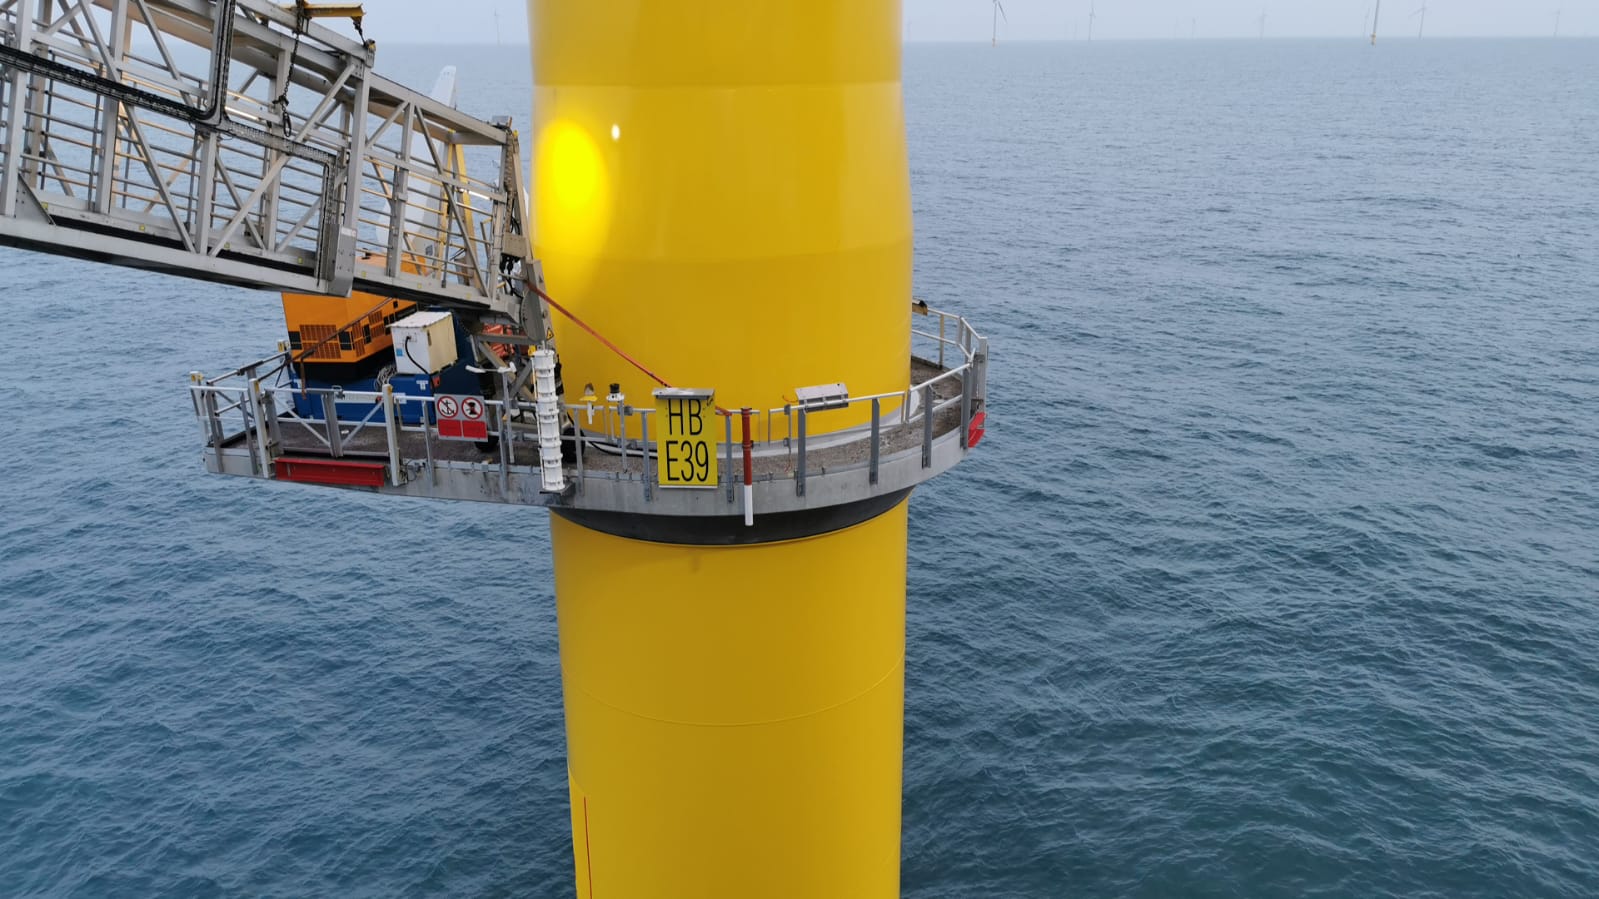 Final turbine installed at Hornsea Two